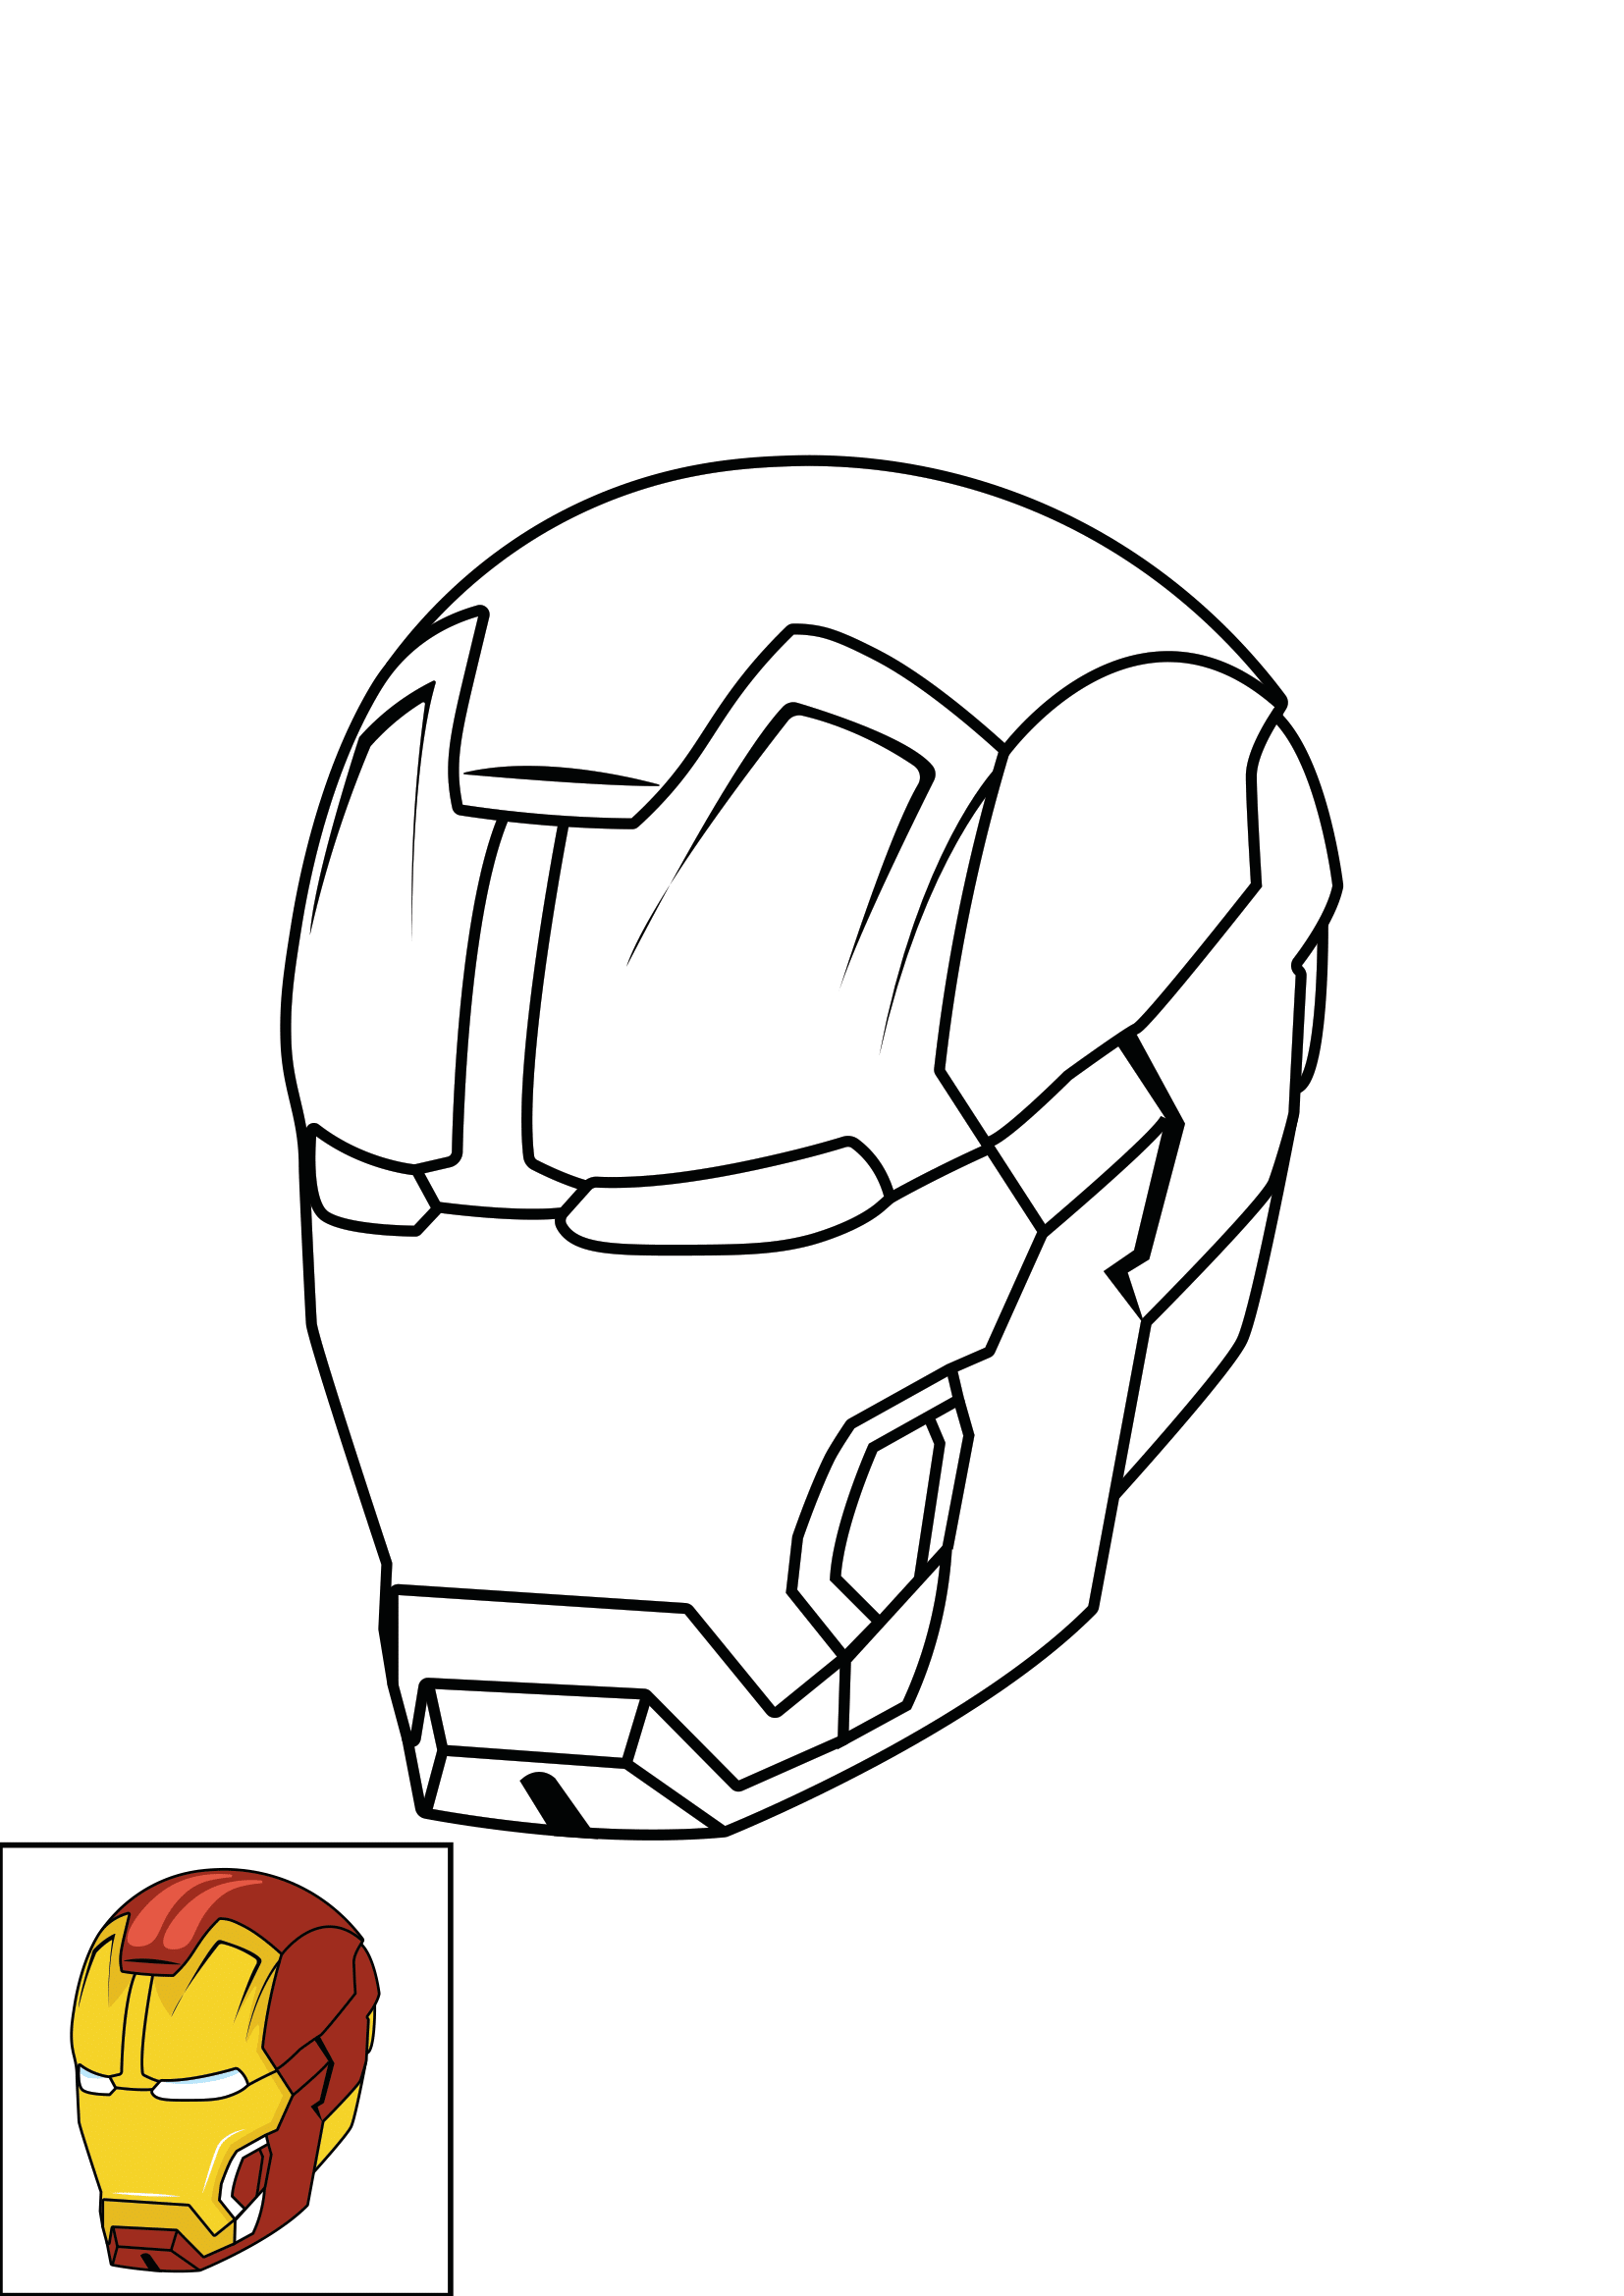 How to Draw The Iron Man Helmet Step by Step Printable Color